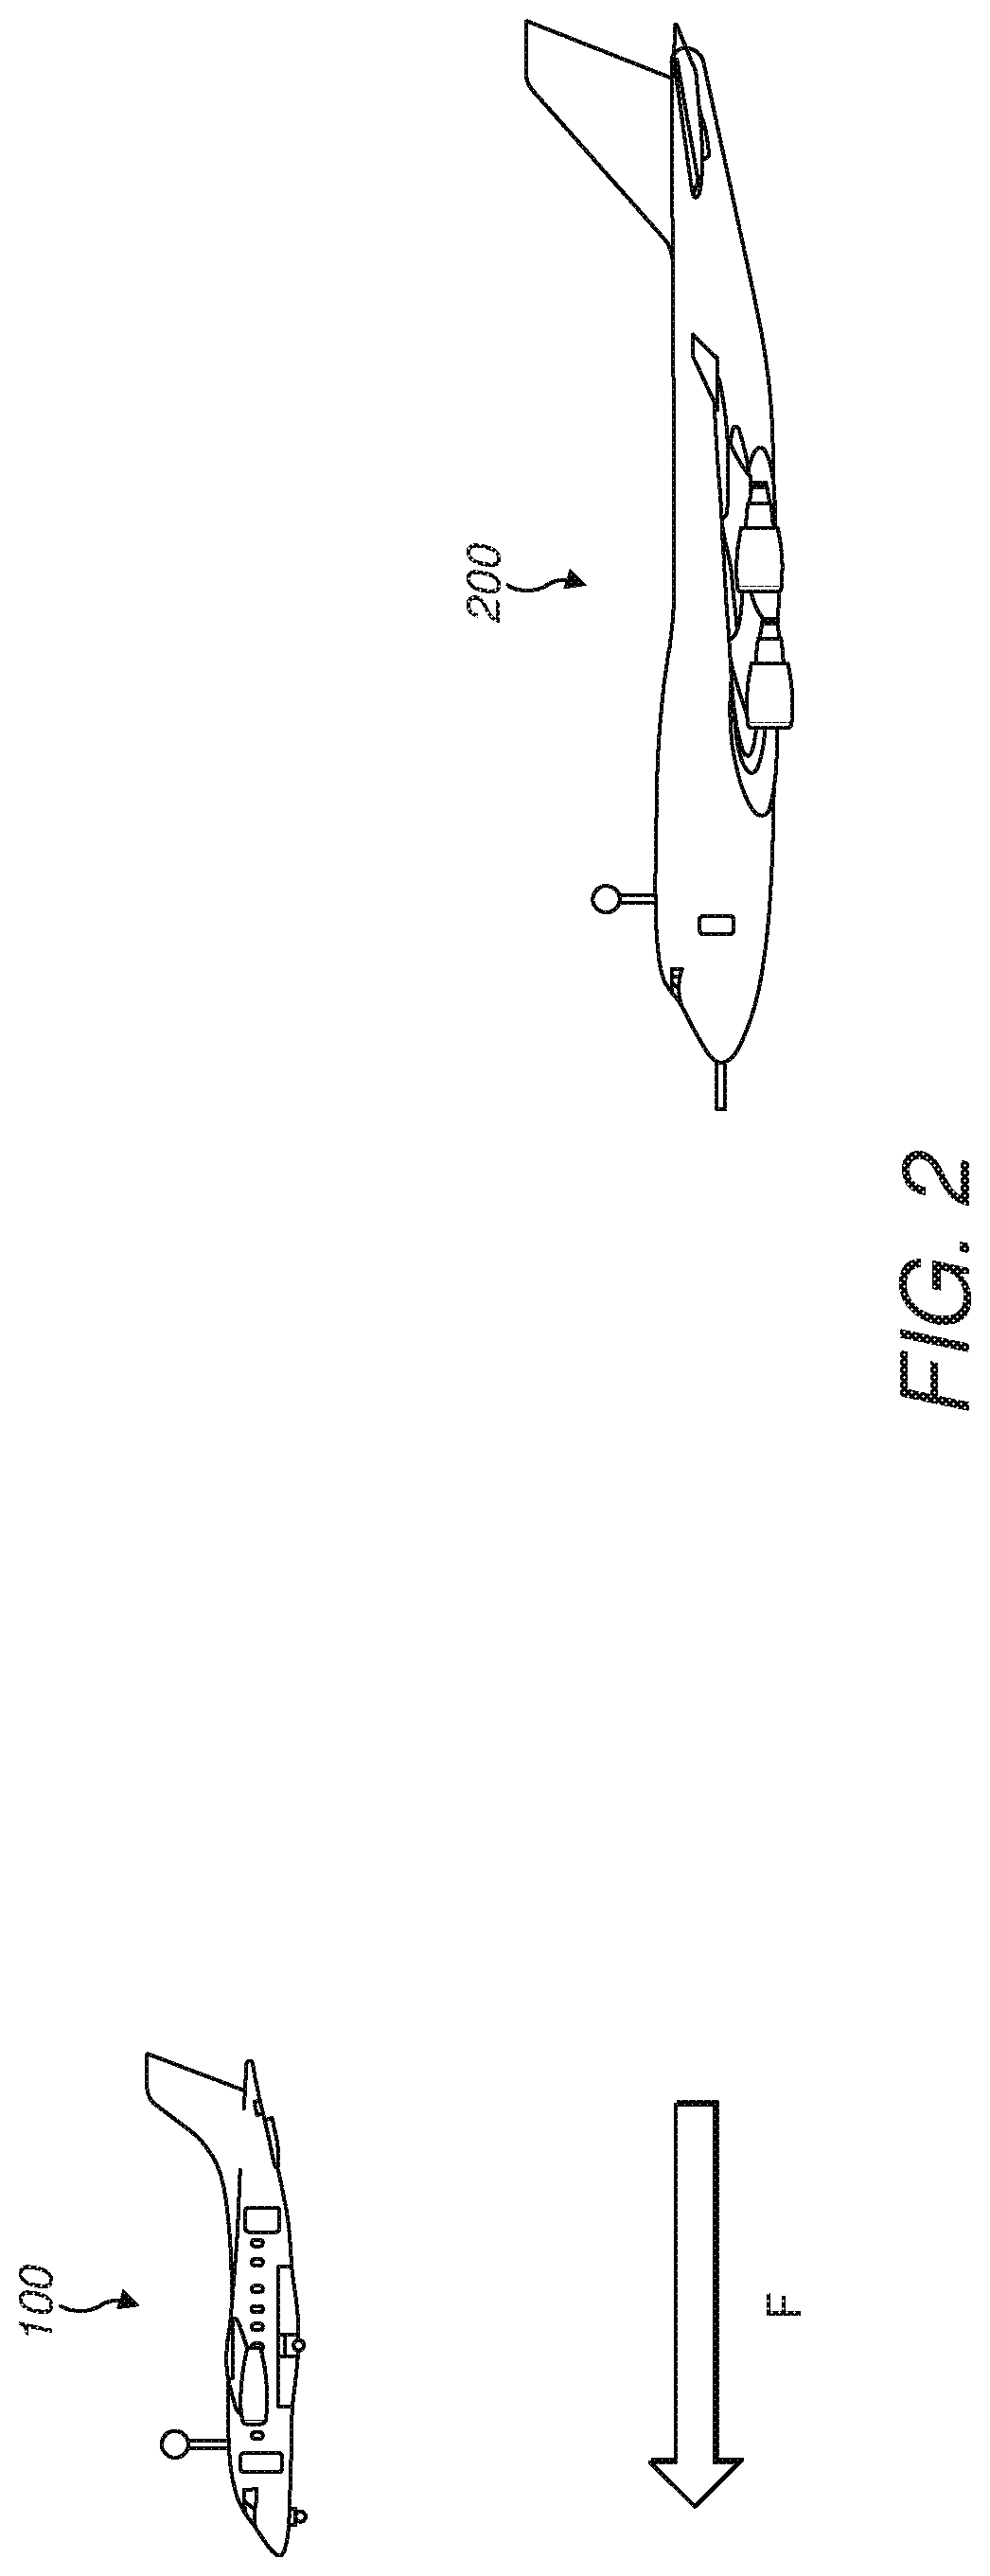 Methods and Systems for In-Flight Charging of Aircraft